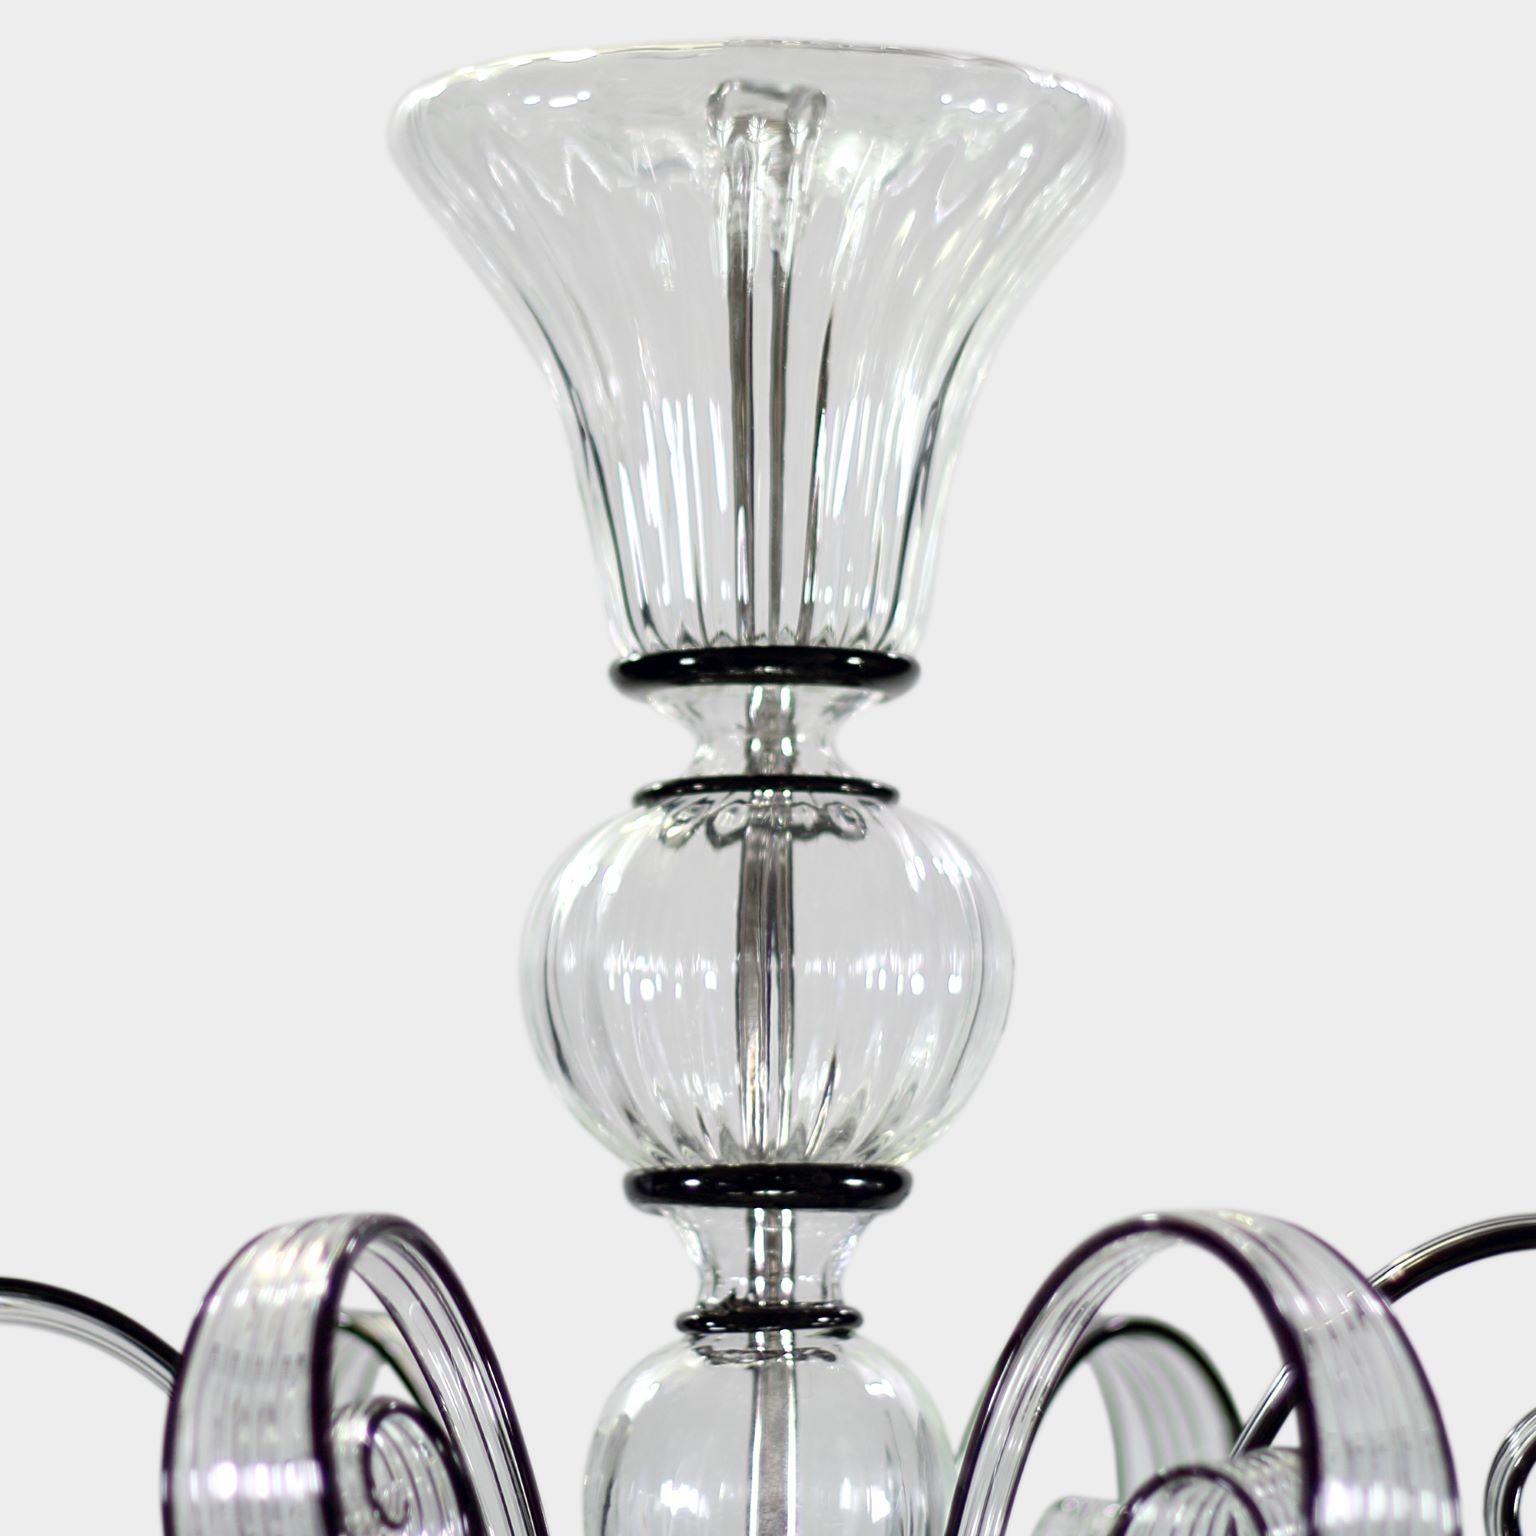 Italian Chandelier 5 Arms Clear Murano Glass Black Details by Multiforme In New Condition For Sale In Trebaseleghe, IT